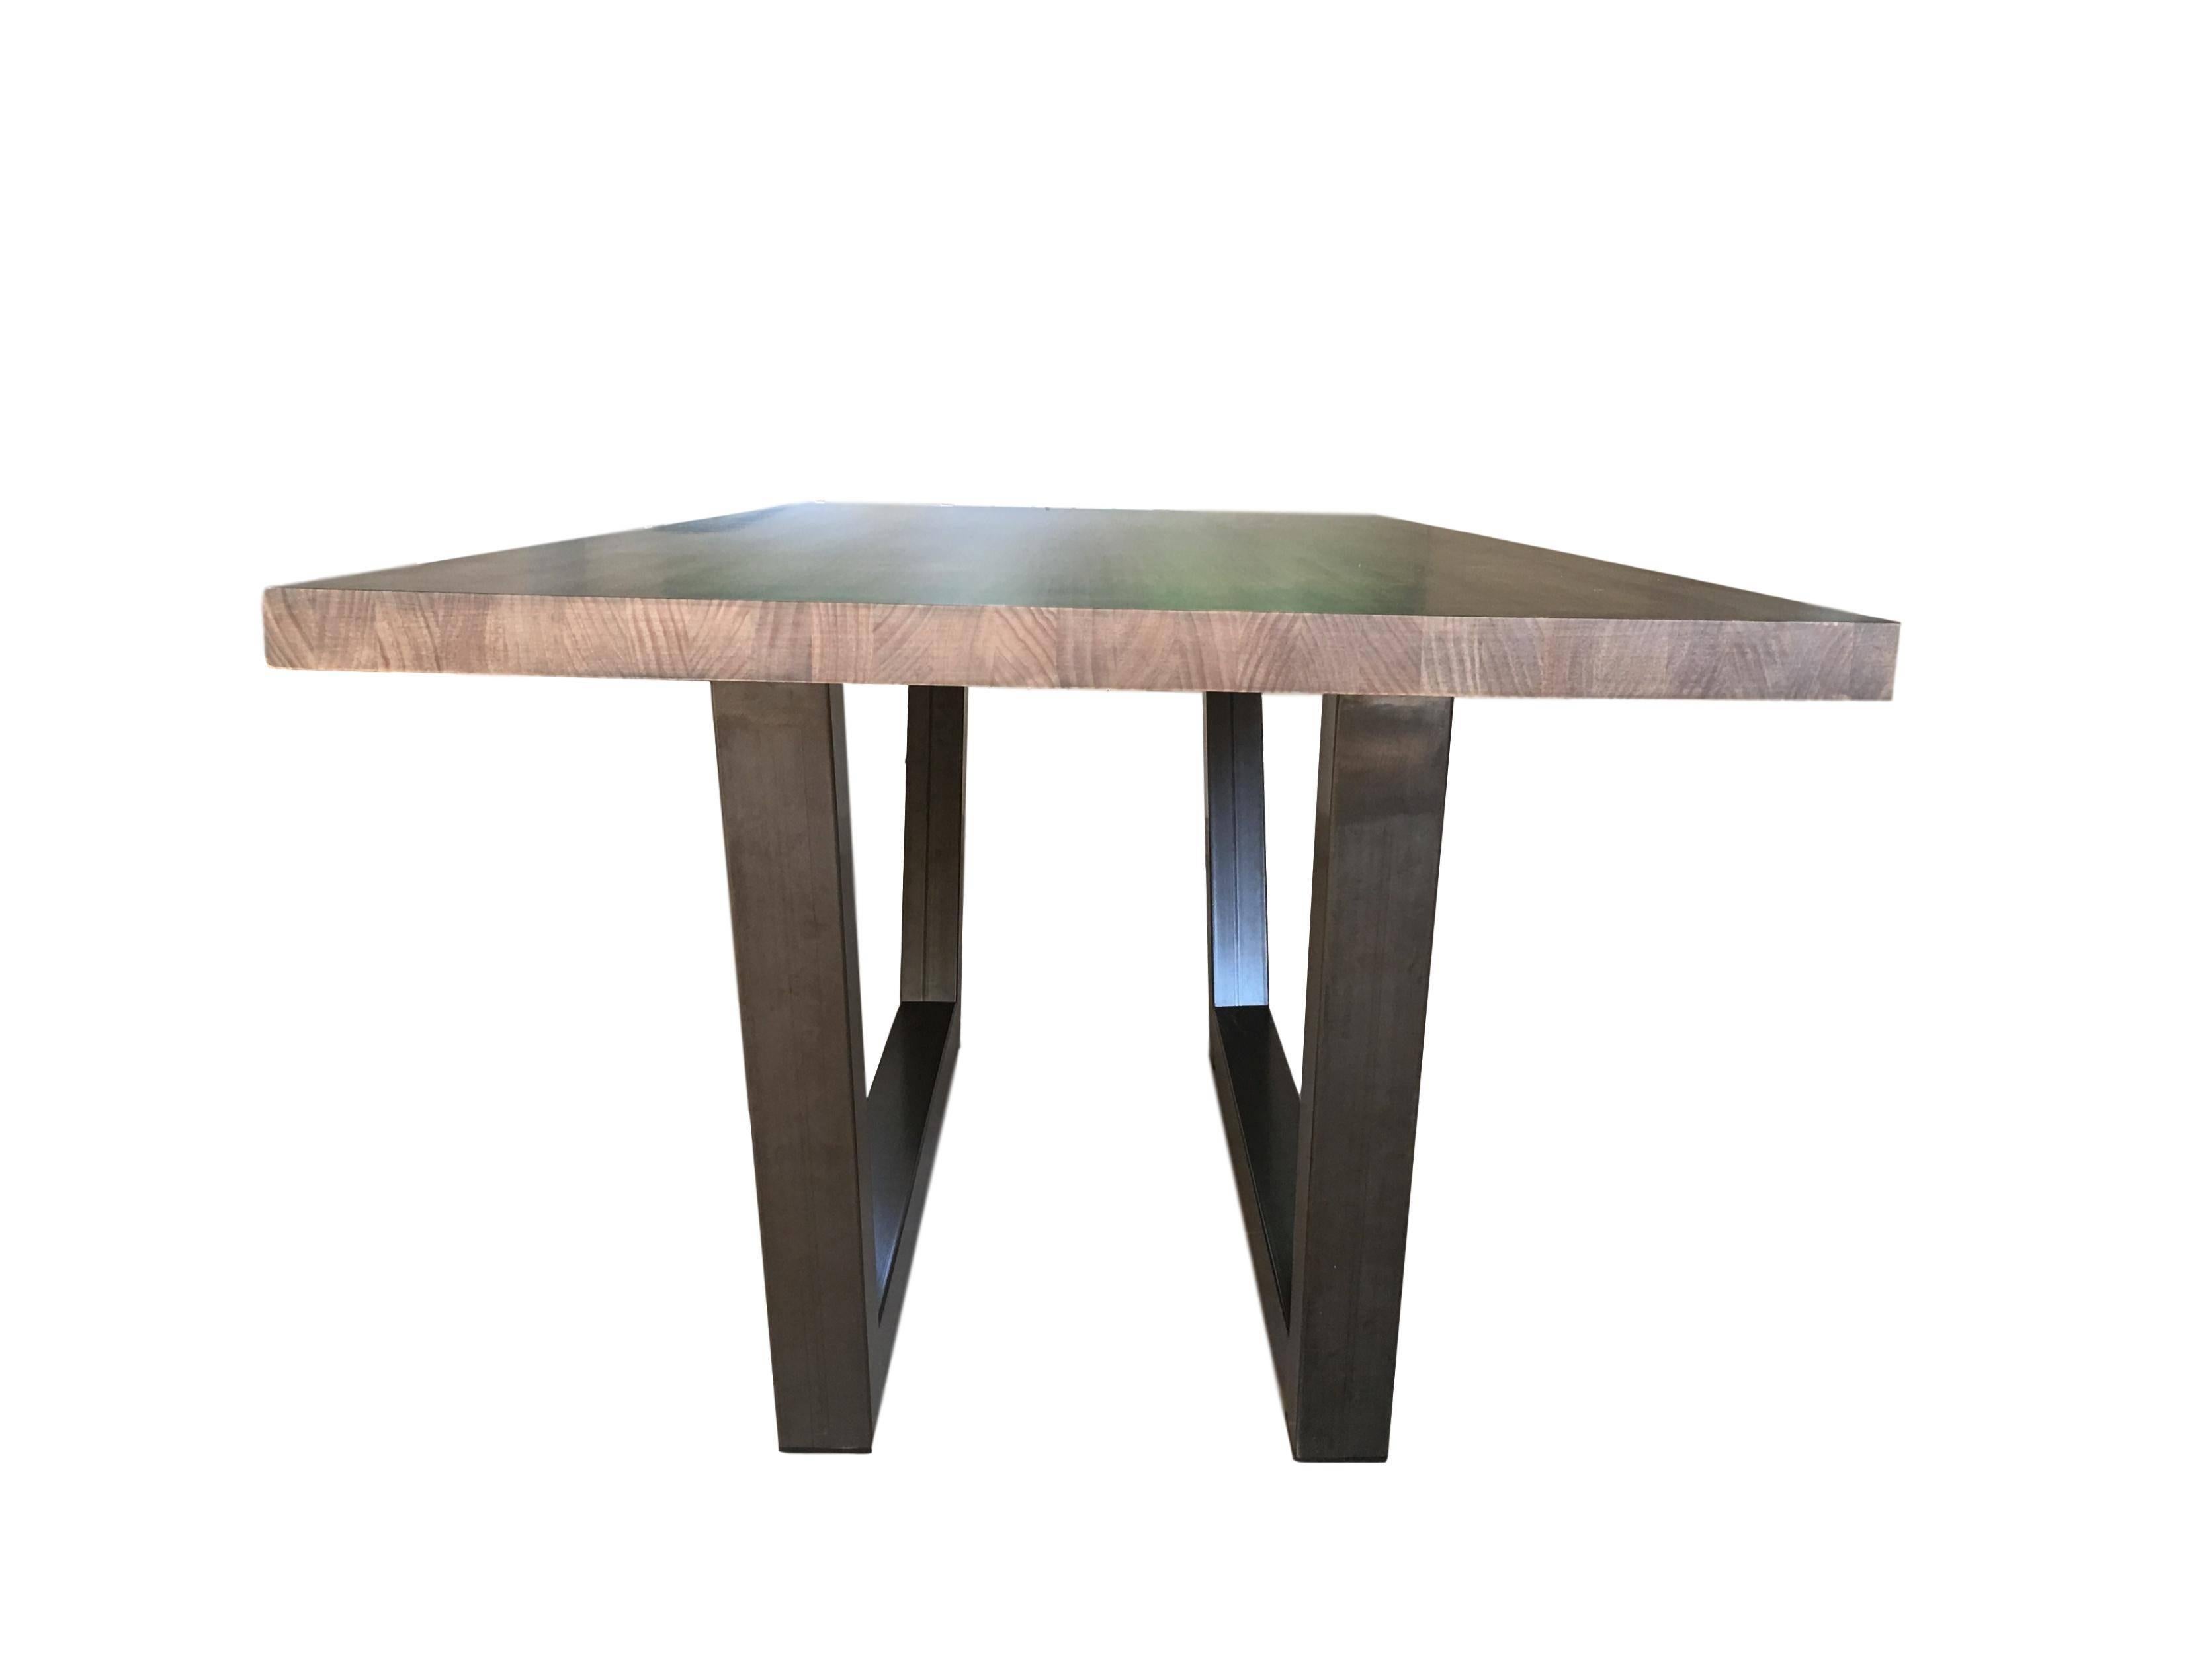 21st century wrought iron dining table with wood top


You can use in outdoor or indoor, you must indicate in the order.
 